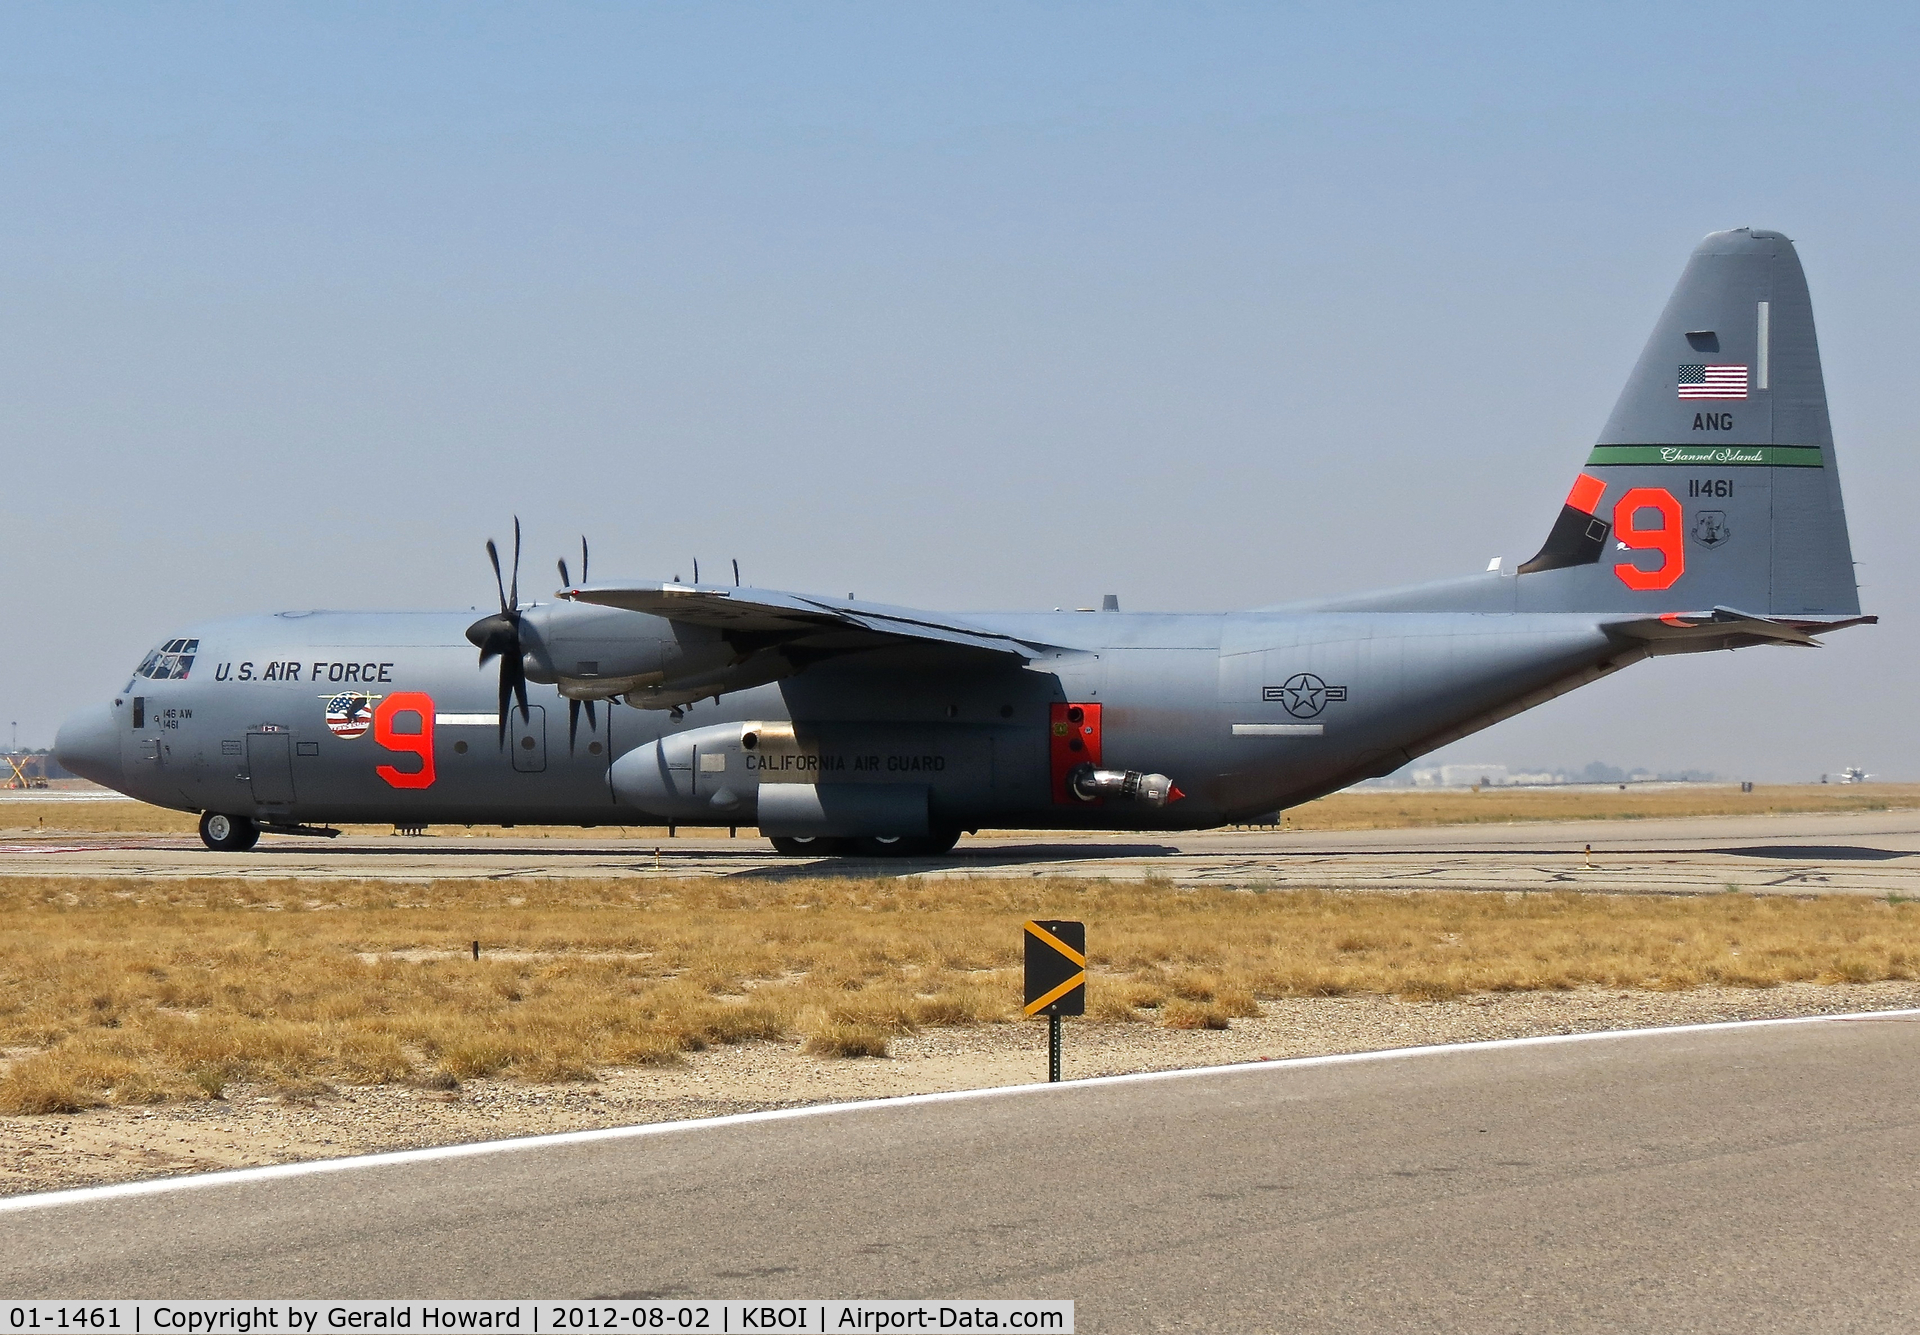 01-1461, 2001 Lockheed Martin C-130J-30 Super Hercules C/N 382-5525, Taxing to RWY 10L. 146th Air Wing, CA ANG equipped with MAFFS.